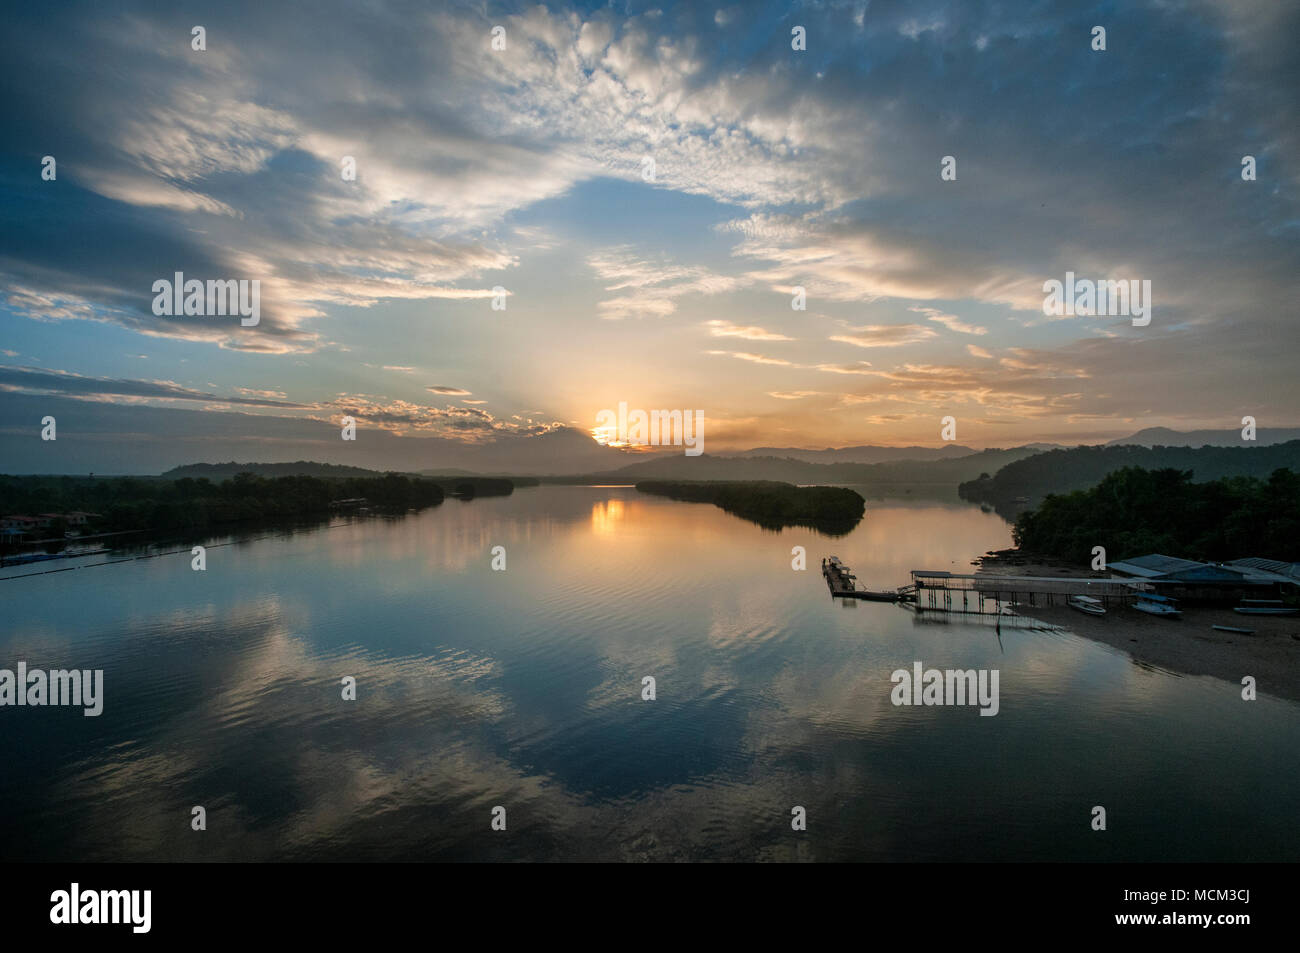 Beautiful and colorful sunrise shot from Mengkabong river with a boat passing under the bridge. Stock Photo